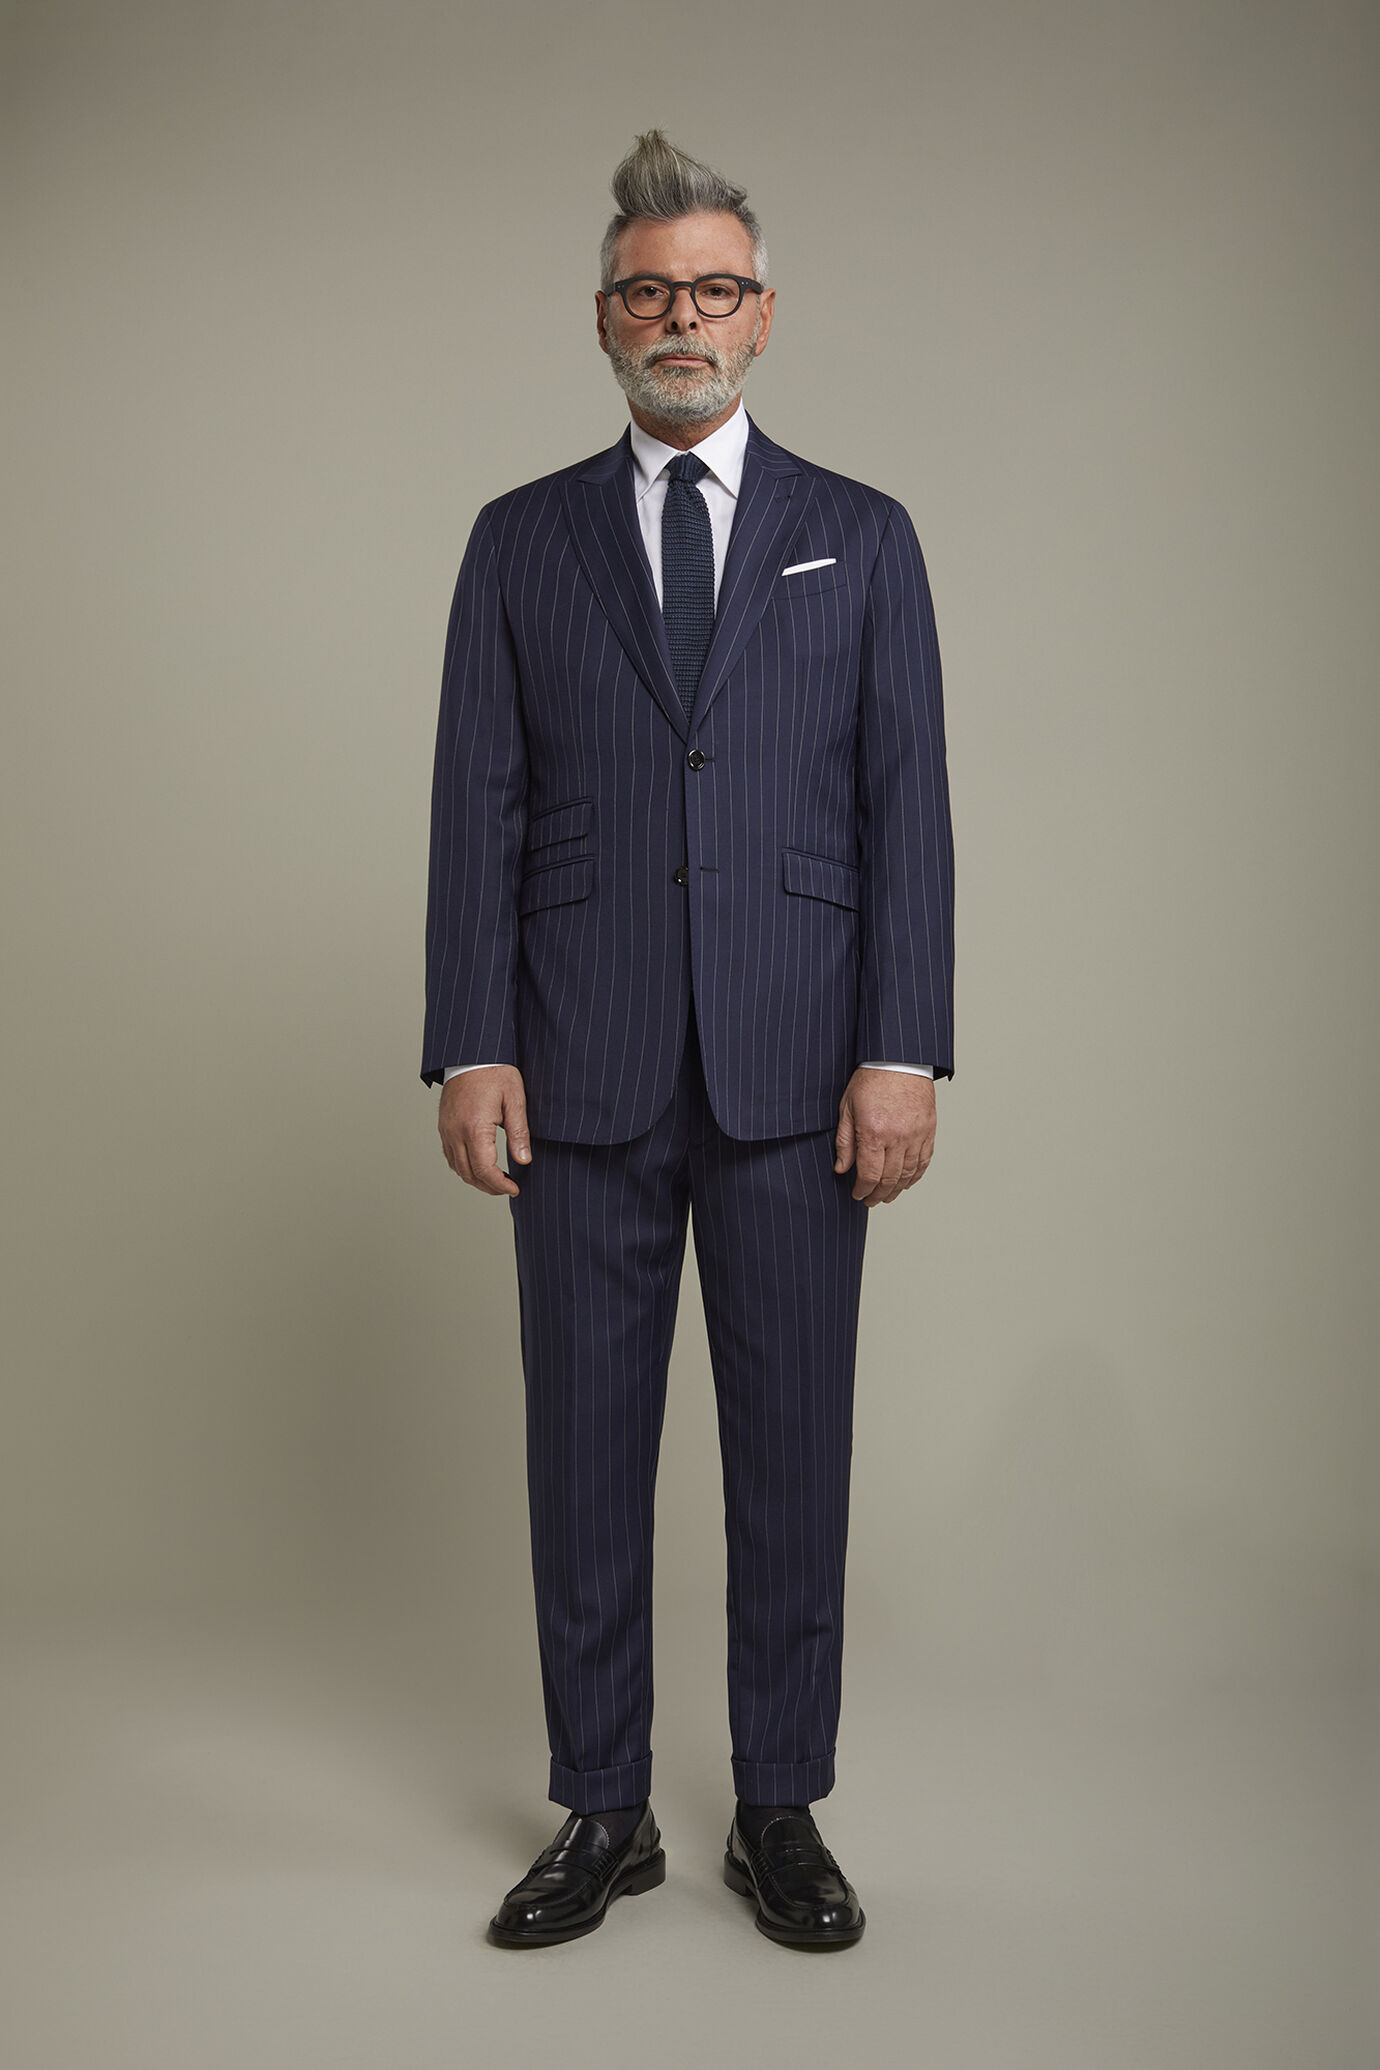 Men's single-breasted Wool Blend suit with regular fit pinstripe design